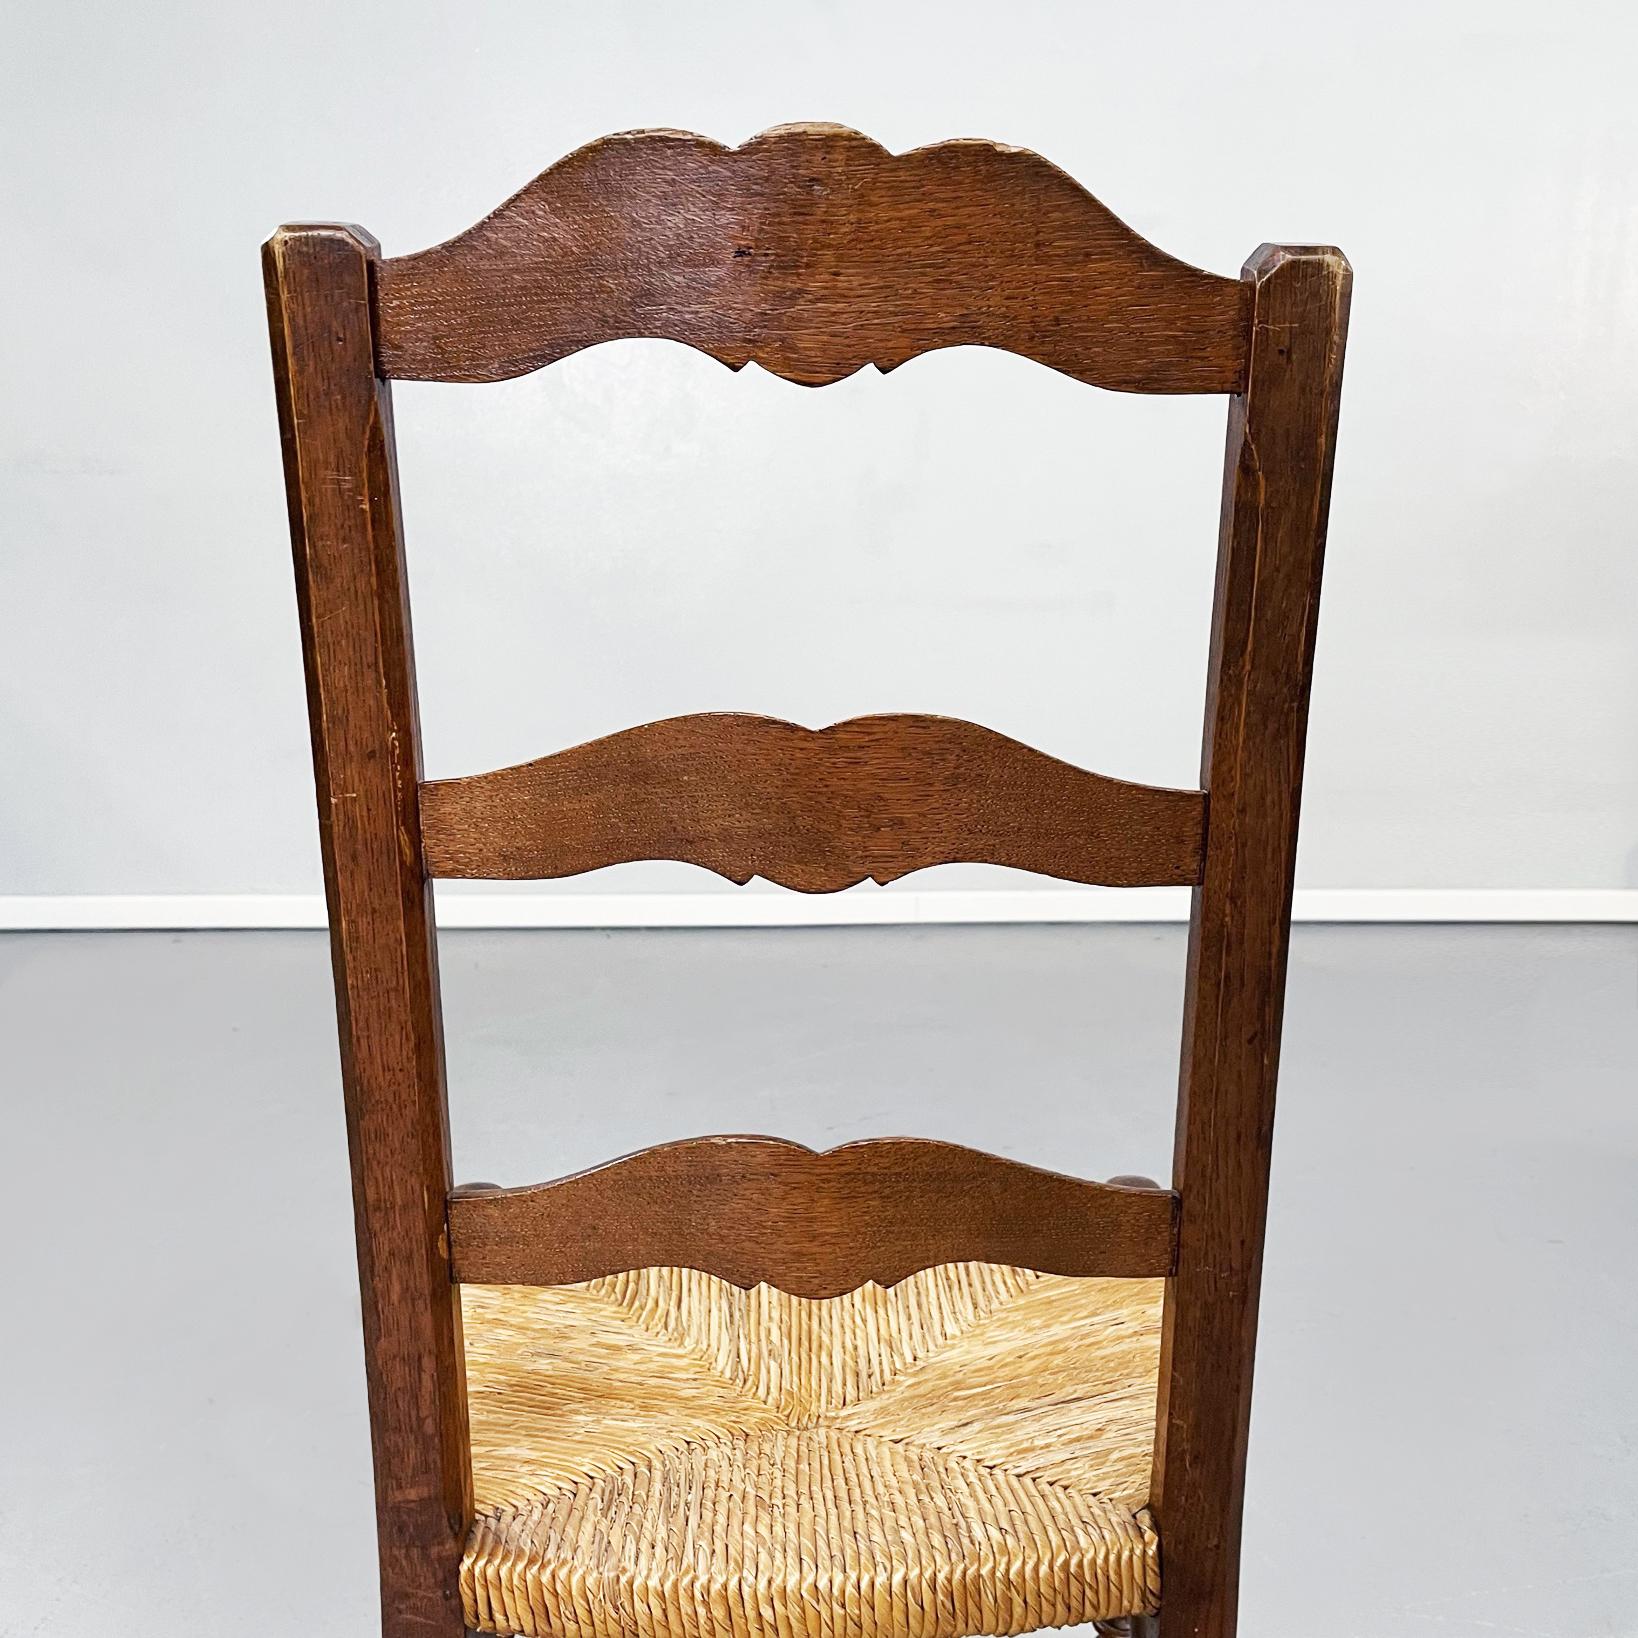 Italian Nineteenth Century Finely Crafted Wooden and Straw Chairs, Late1800s For Sale 11